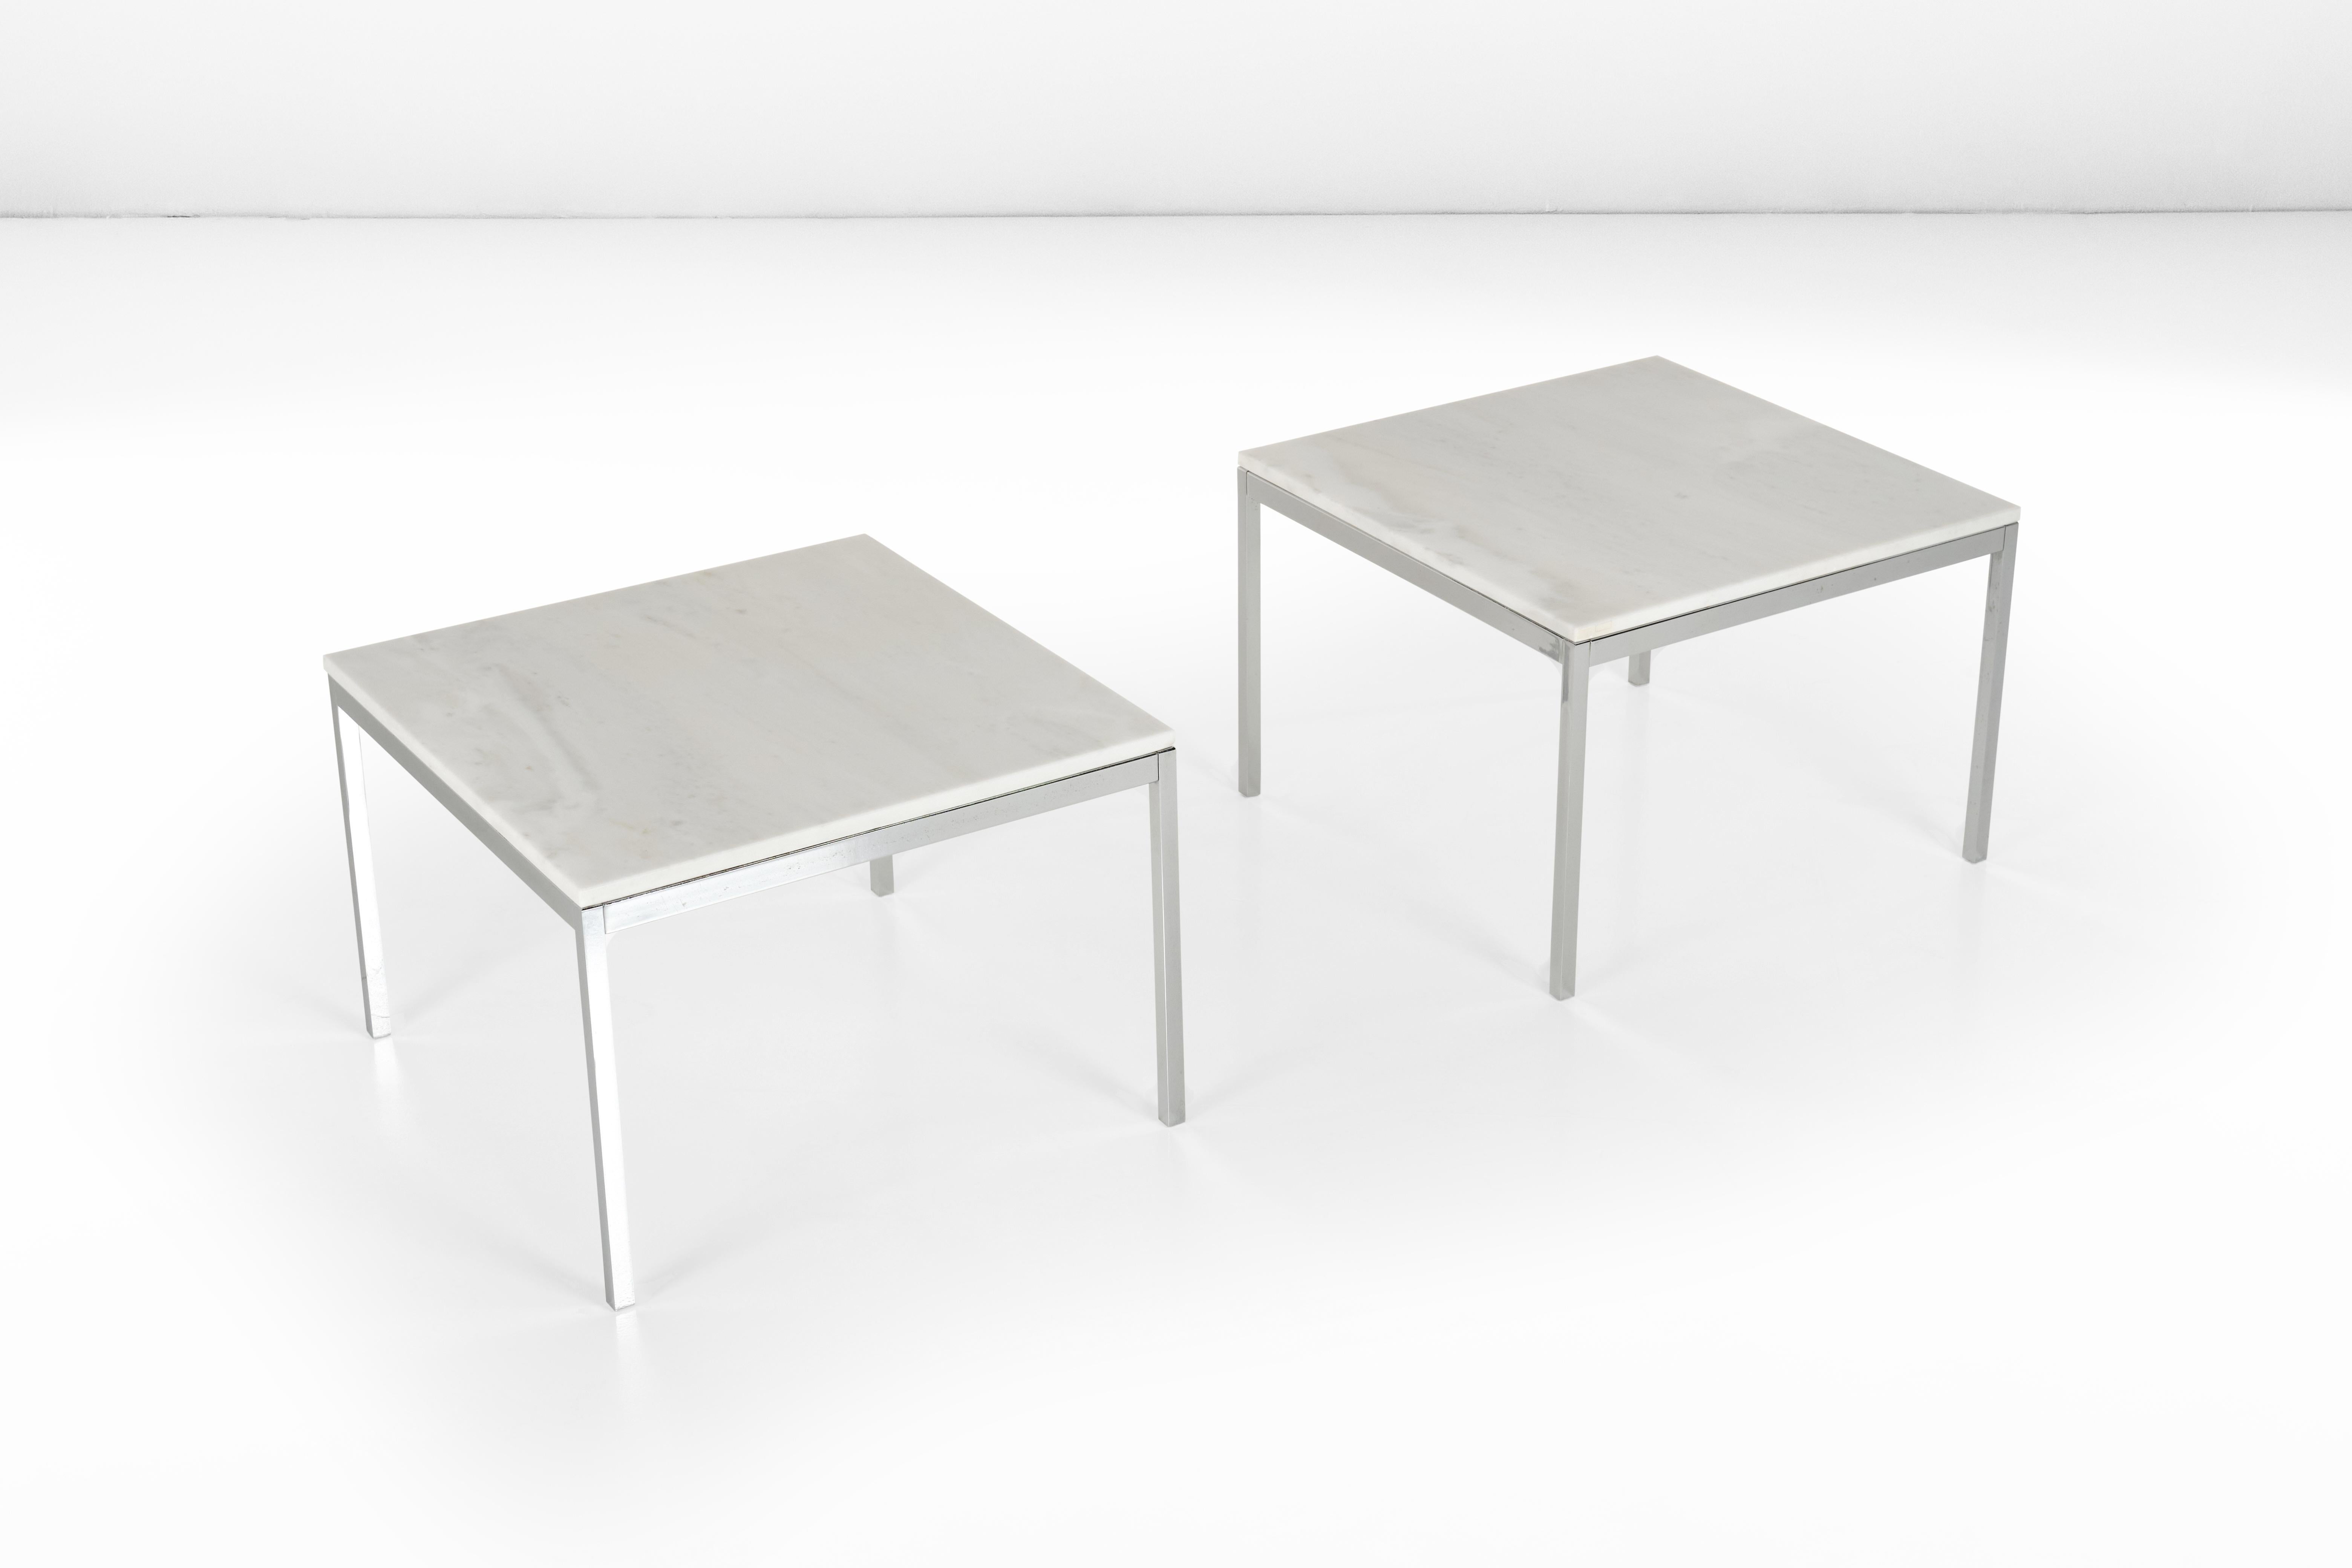 Italian Set of Two Metal and Mar Low Table by Florence Knoll, American Design, 1960s For Sale